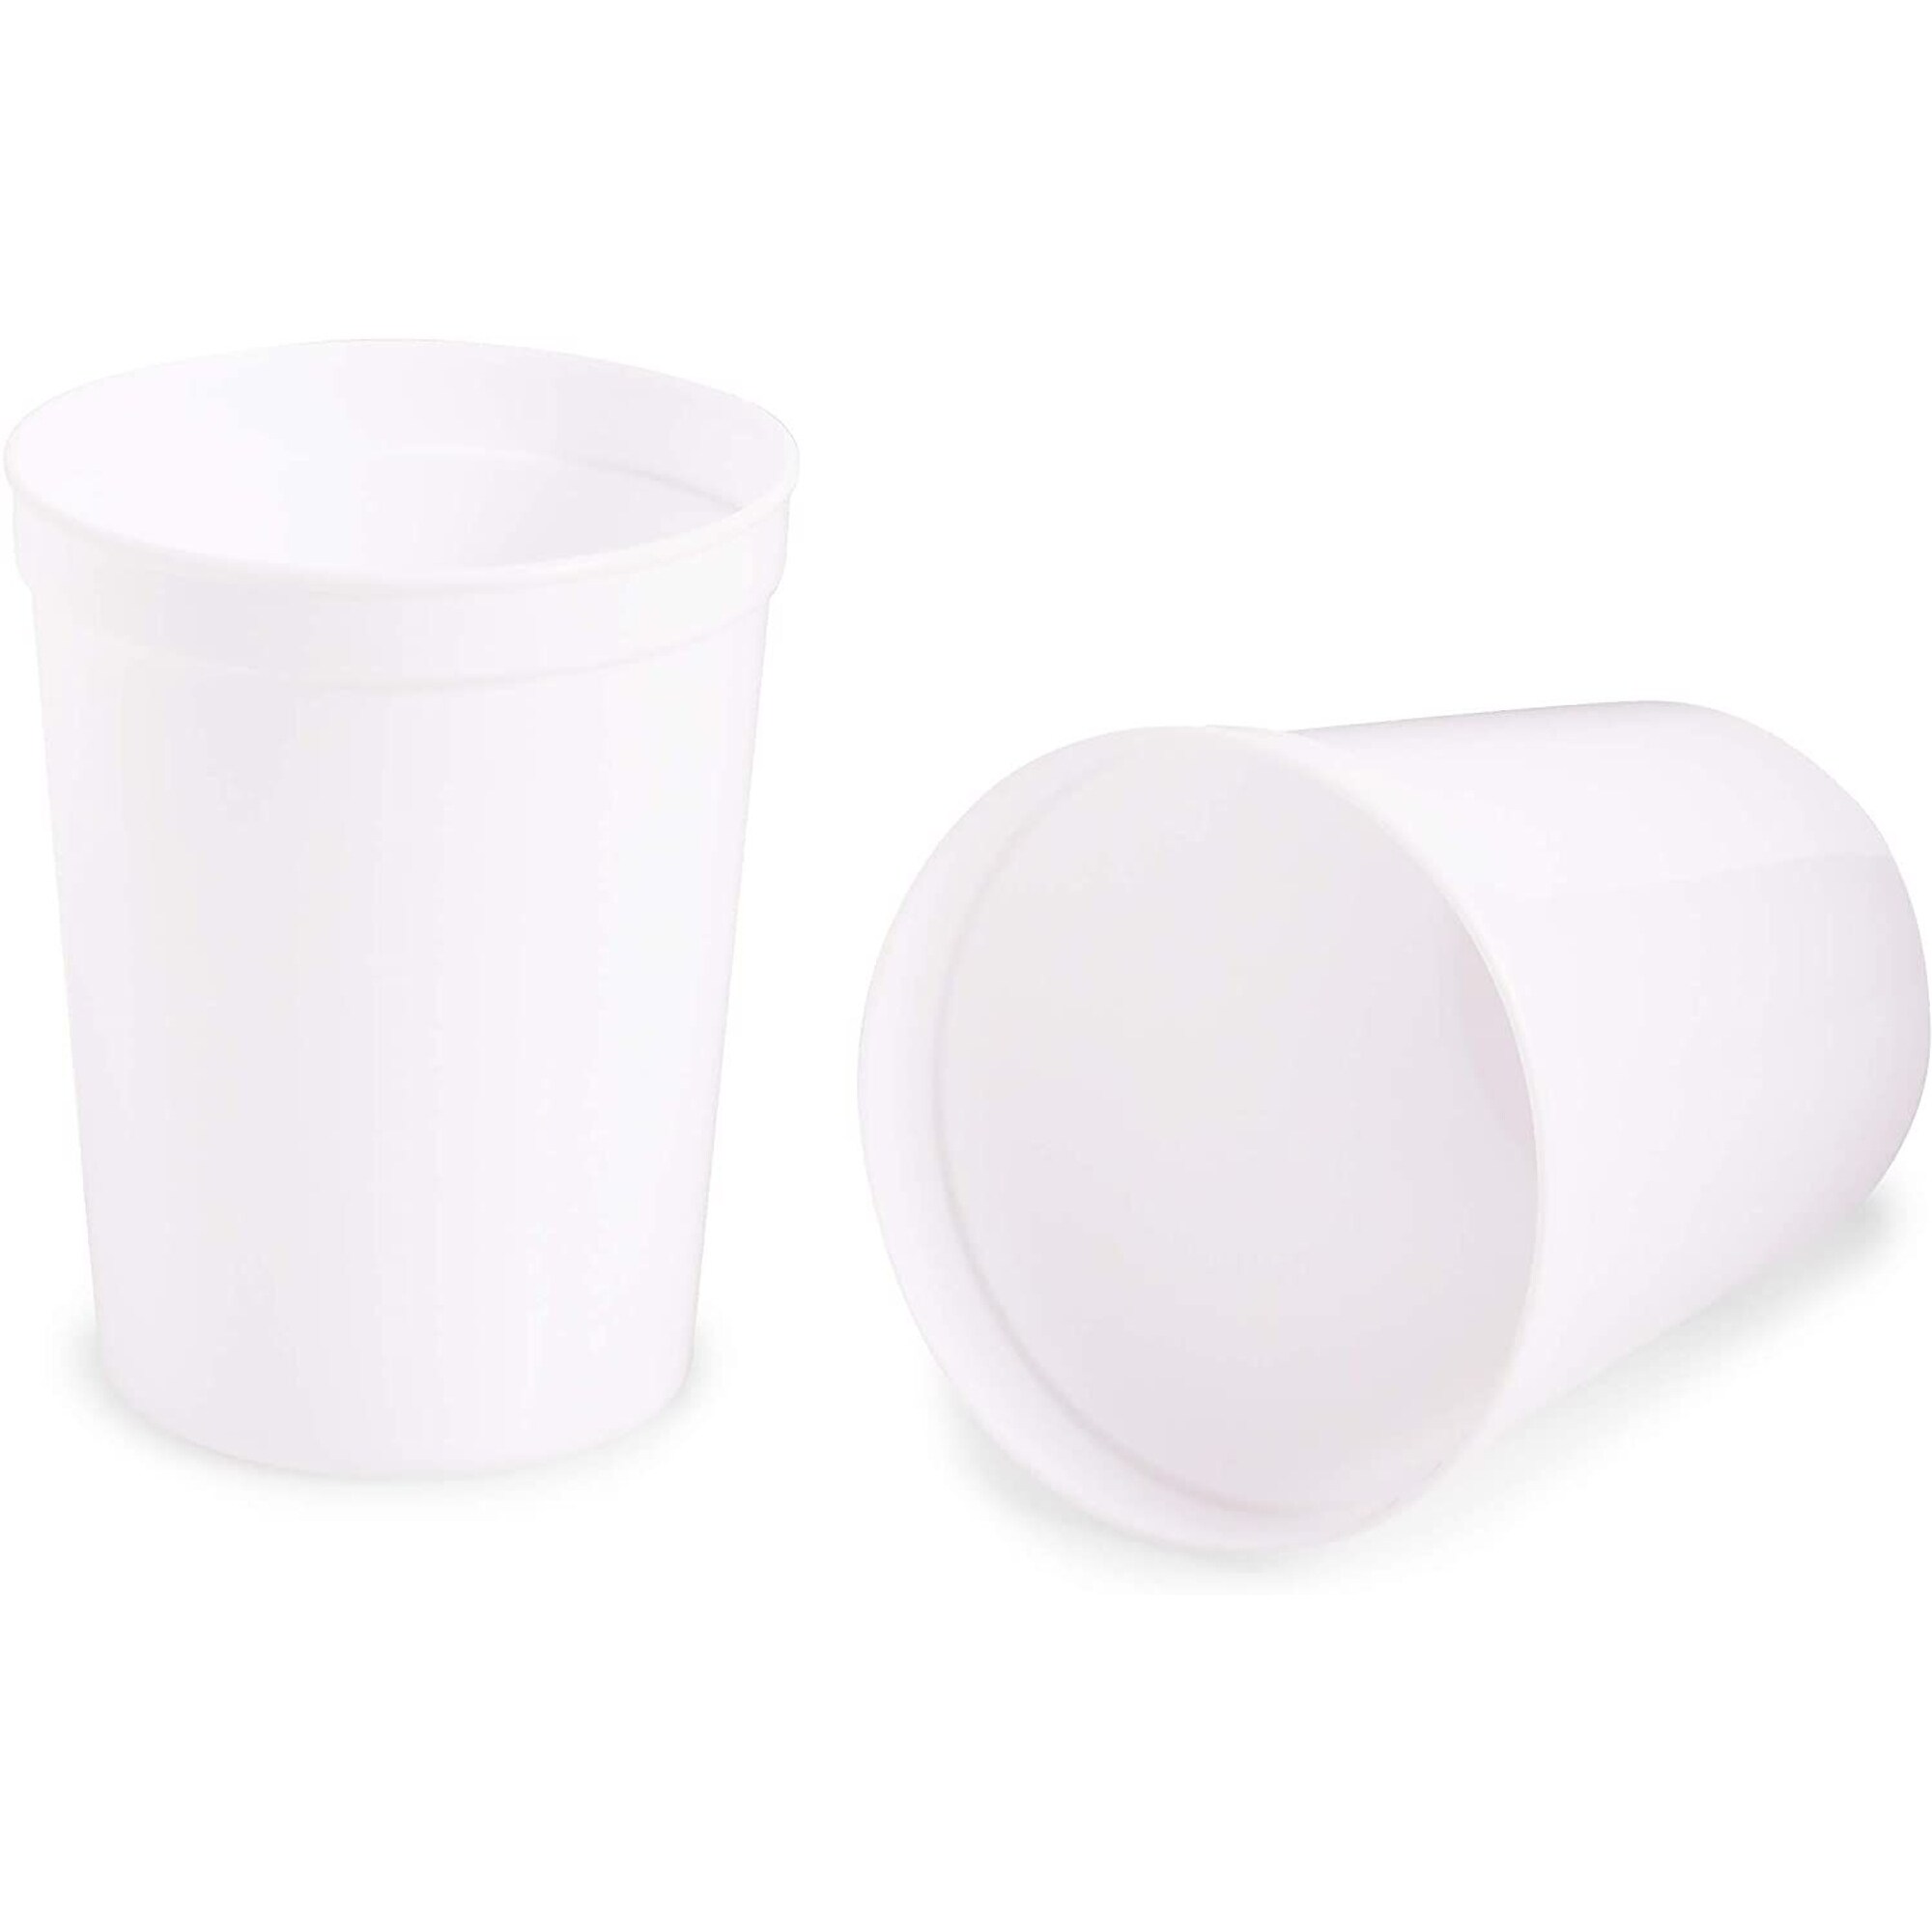 https://ak1.ostkcdn.com/images/products/is/images/direct/3266befe214c0df3688d738a9a0179e43e8f67e8/White-Stadium-Cups%2C-Reusable-Plastic-Party-Tumblers-%2816-oz%2C-16-Pack%29.jpg